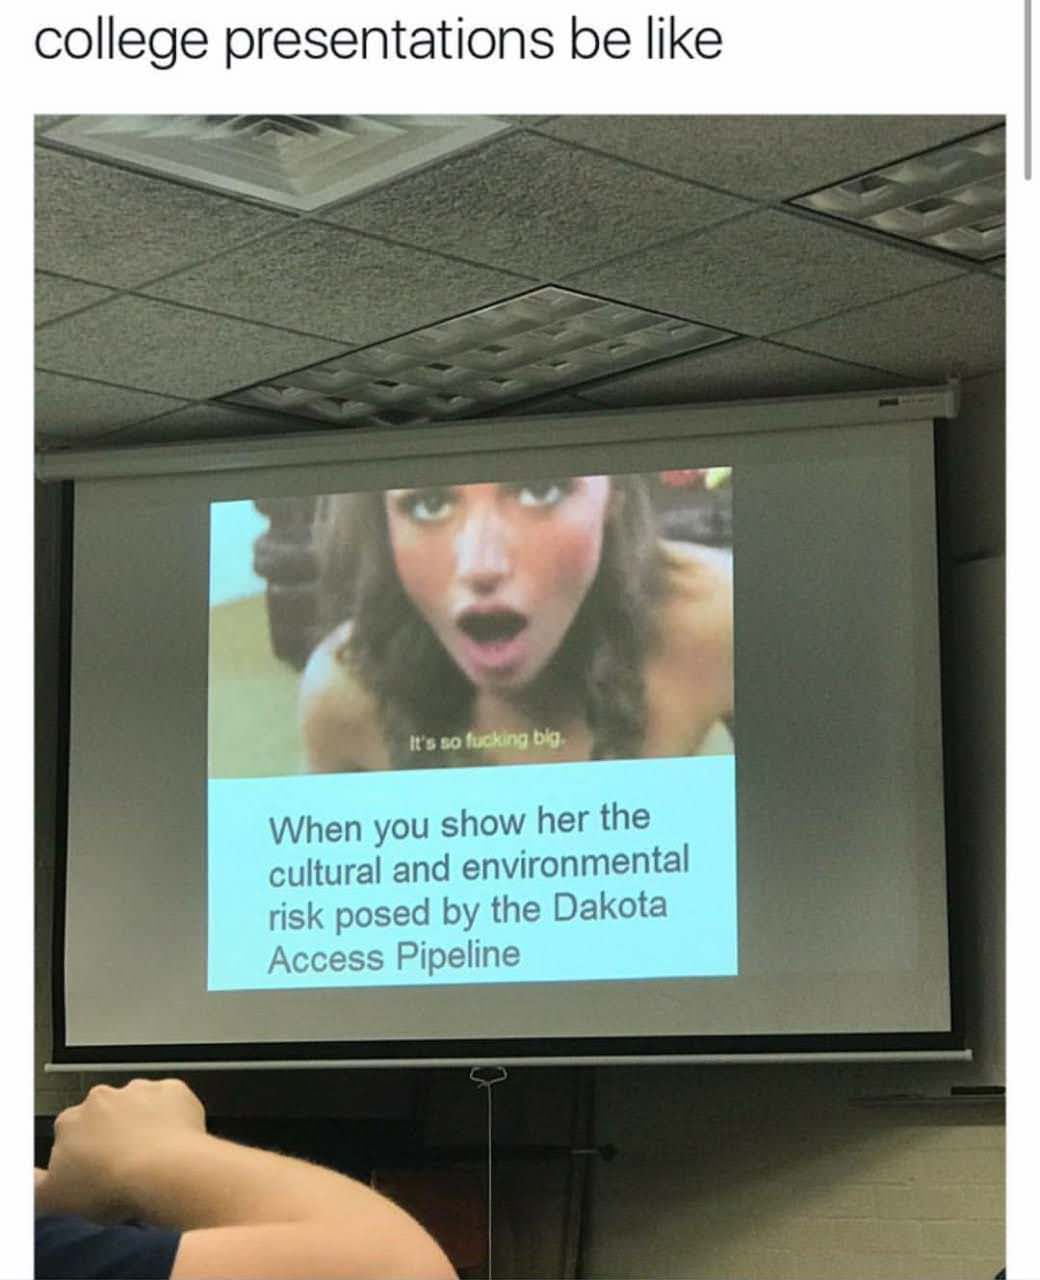 memes about presentations - college presentations be It's so fucking big When you show her the cultural and environmental risk posed by the Dakota Access Pipeline